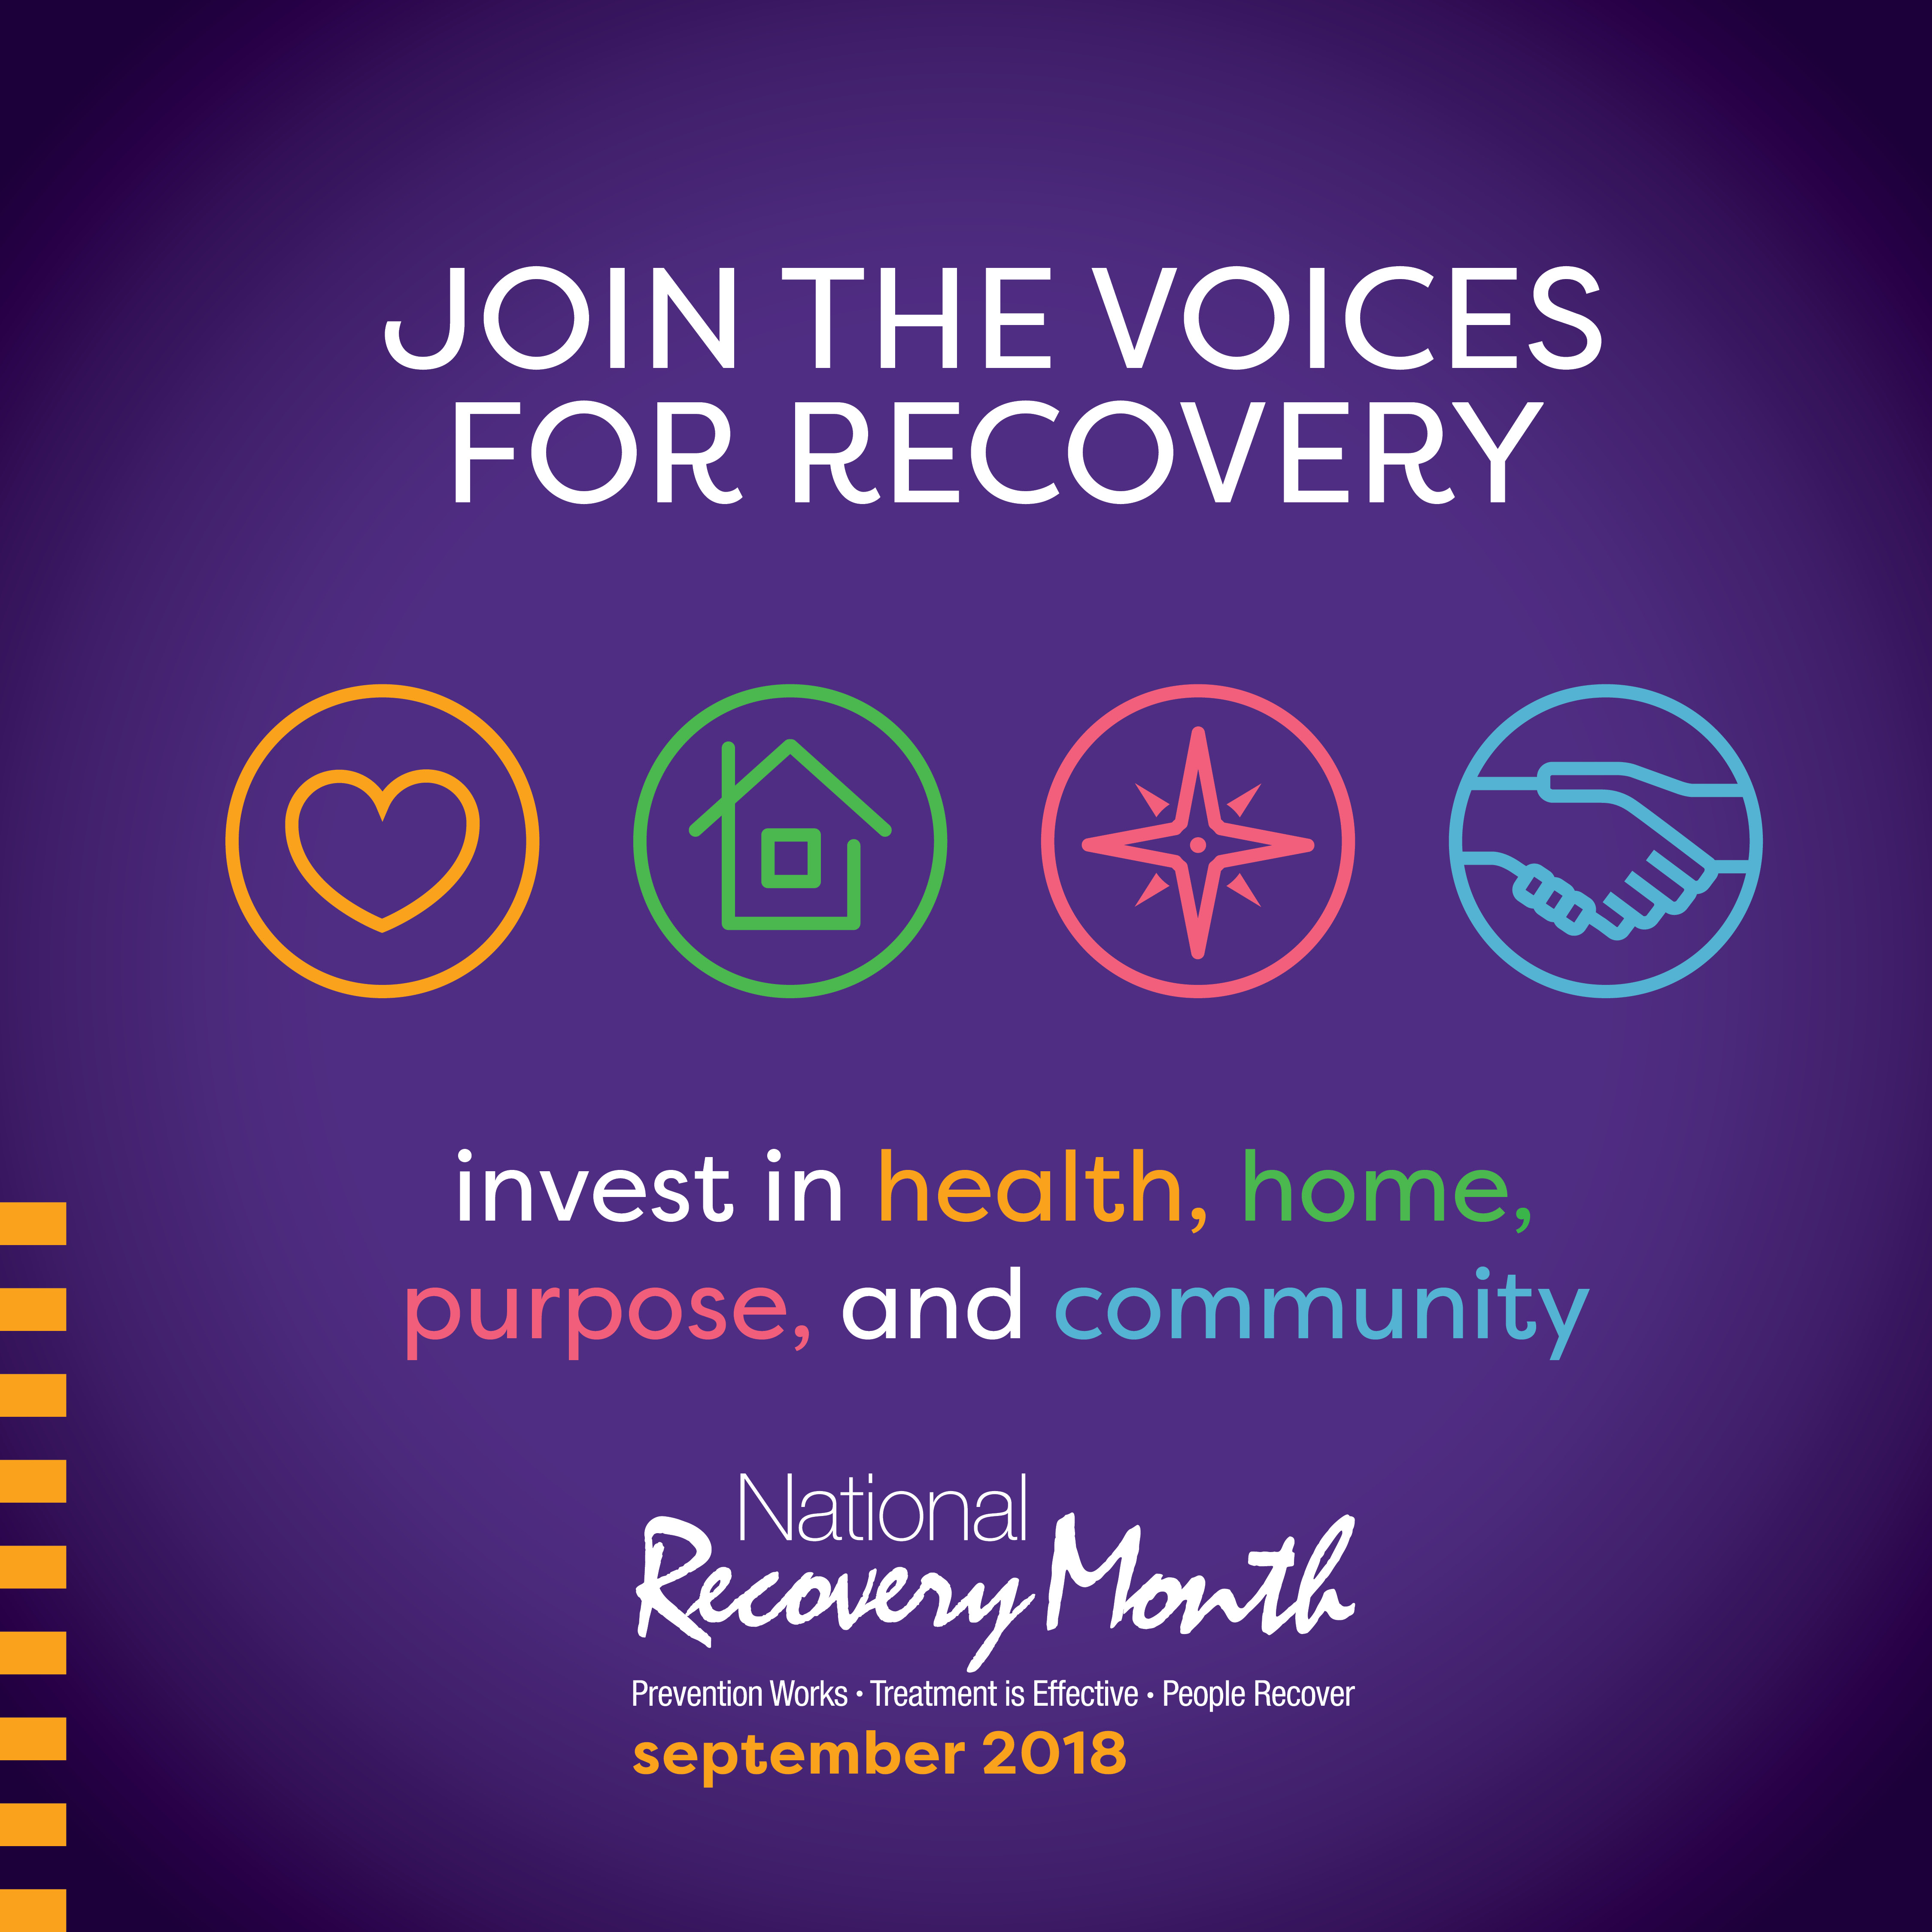 Recovery Month ADAMH Board of Franklin County